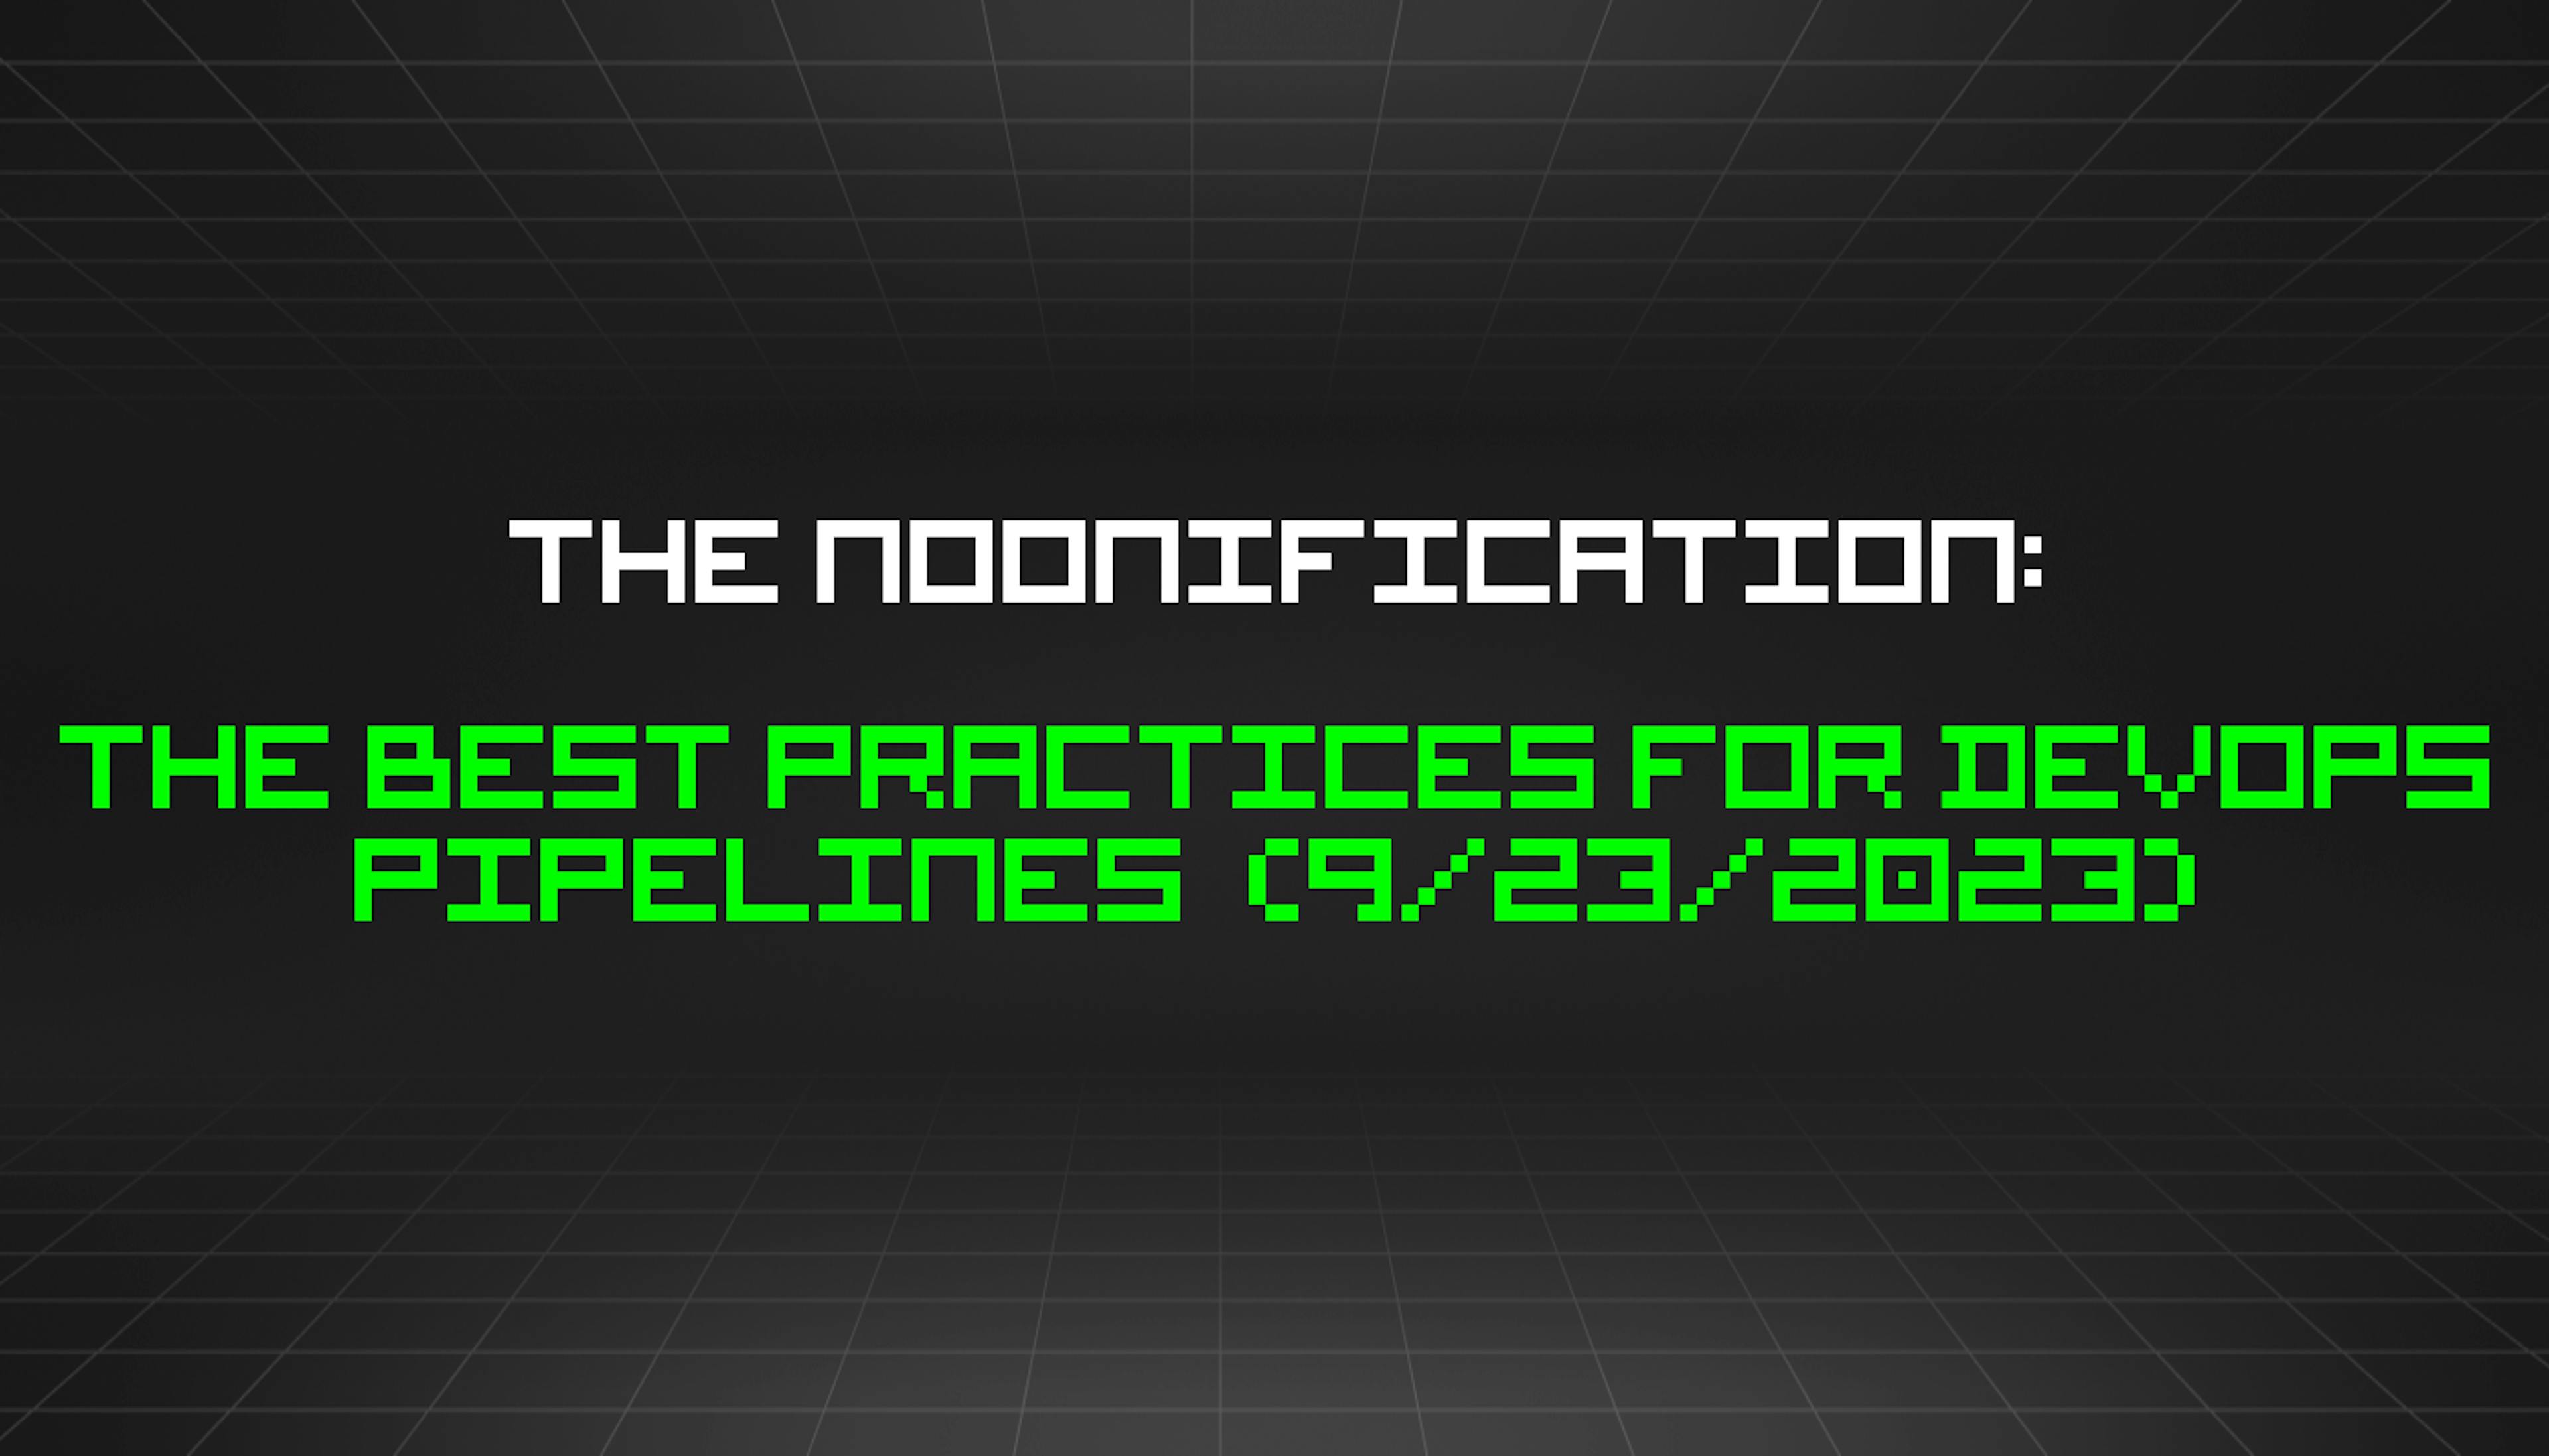 /9-23-2023-noonification feature image